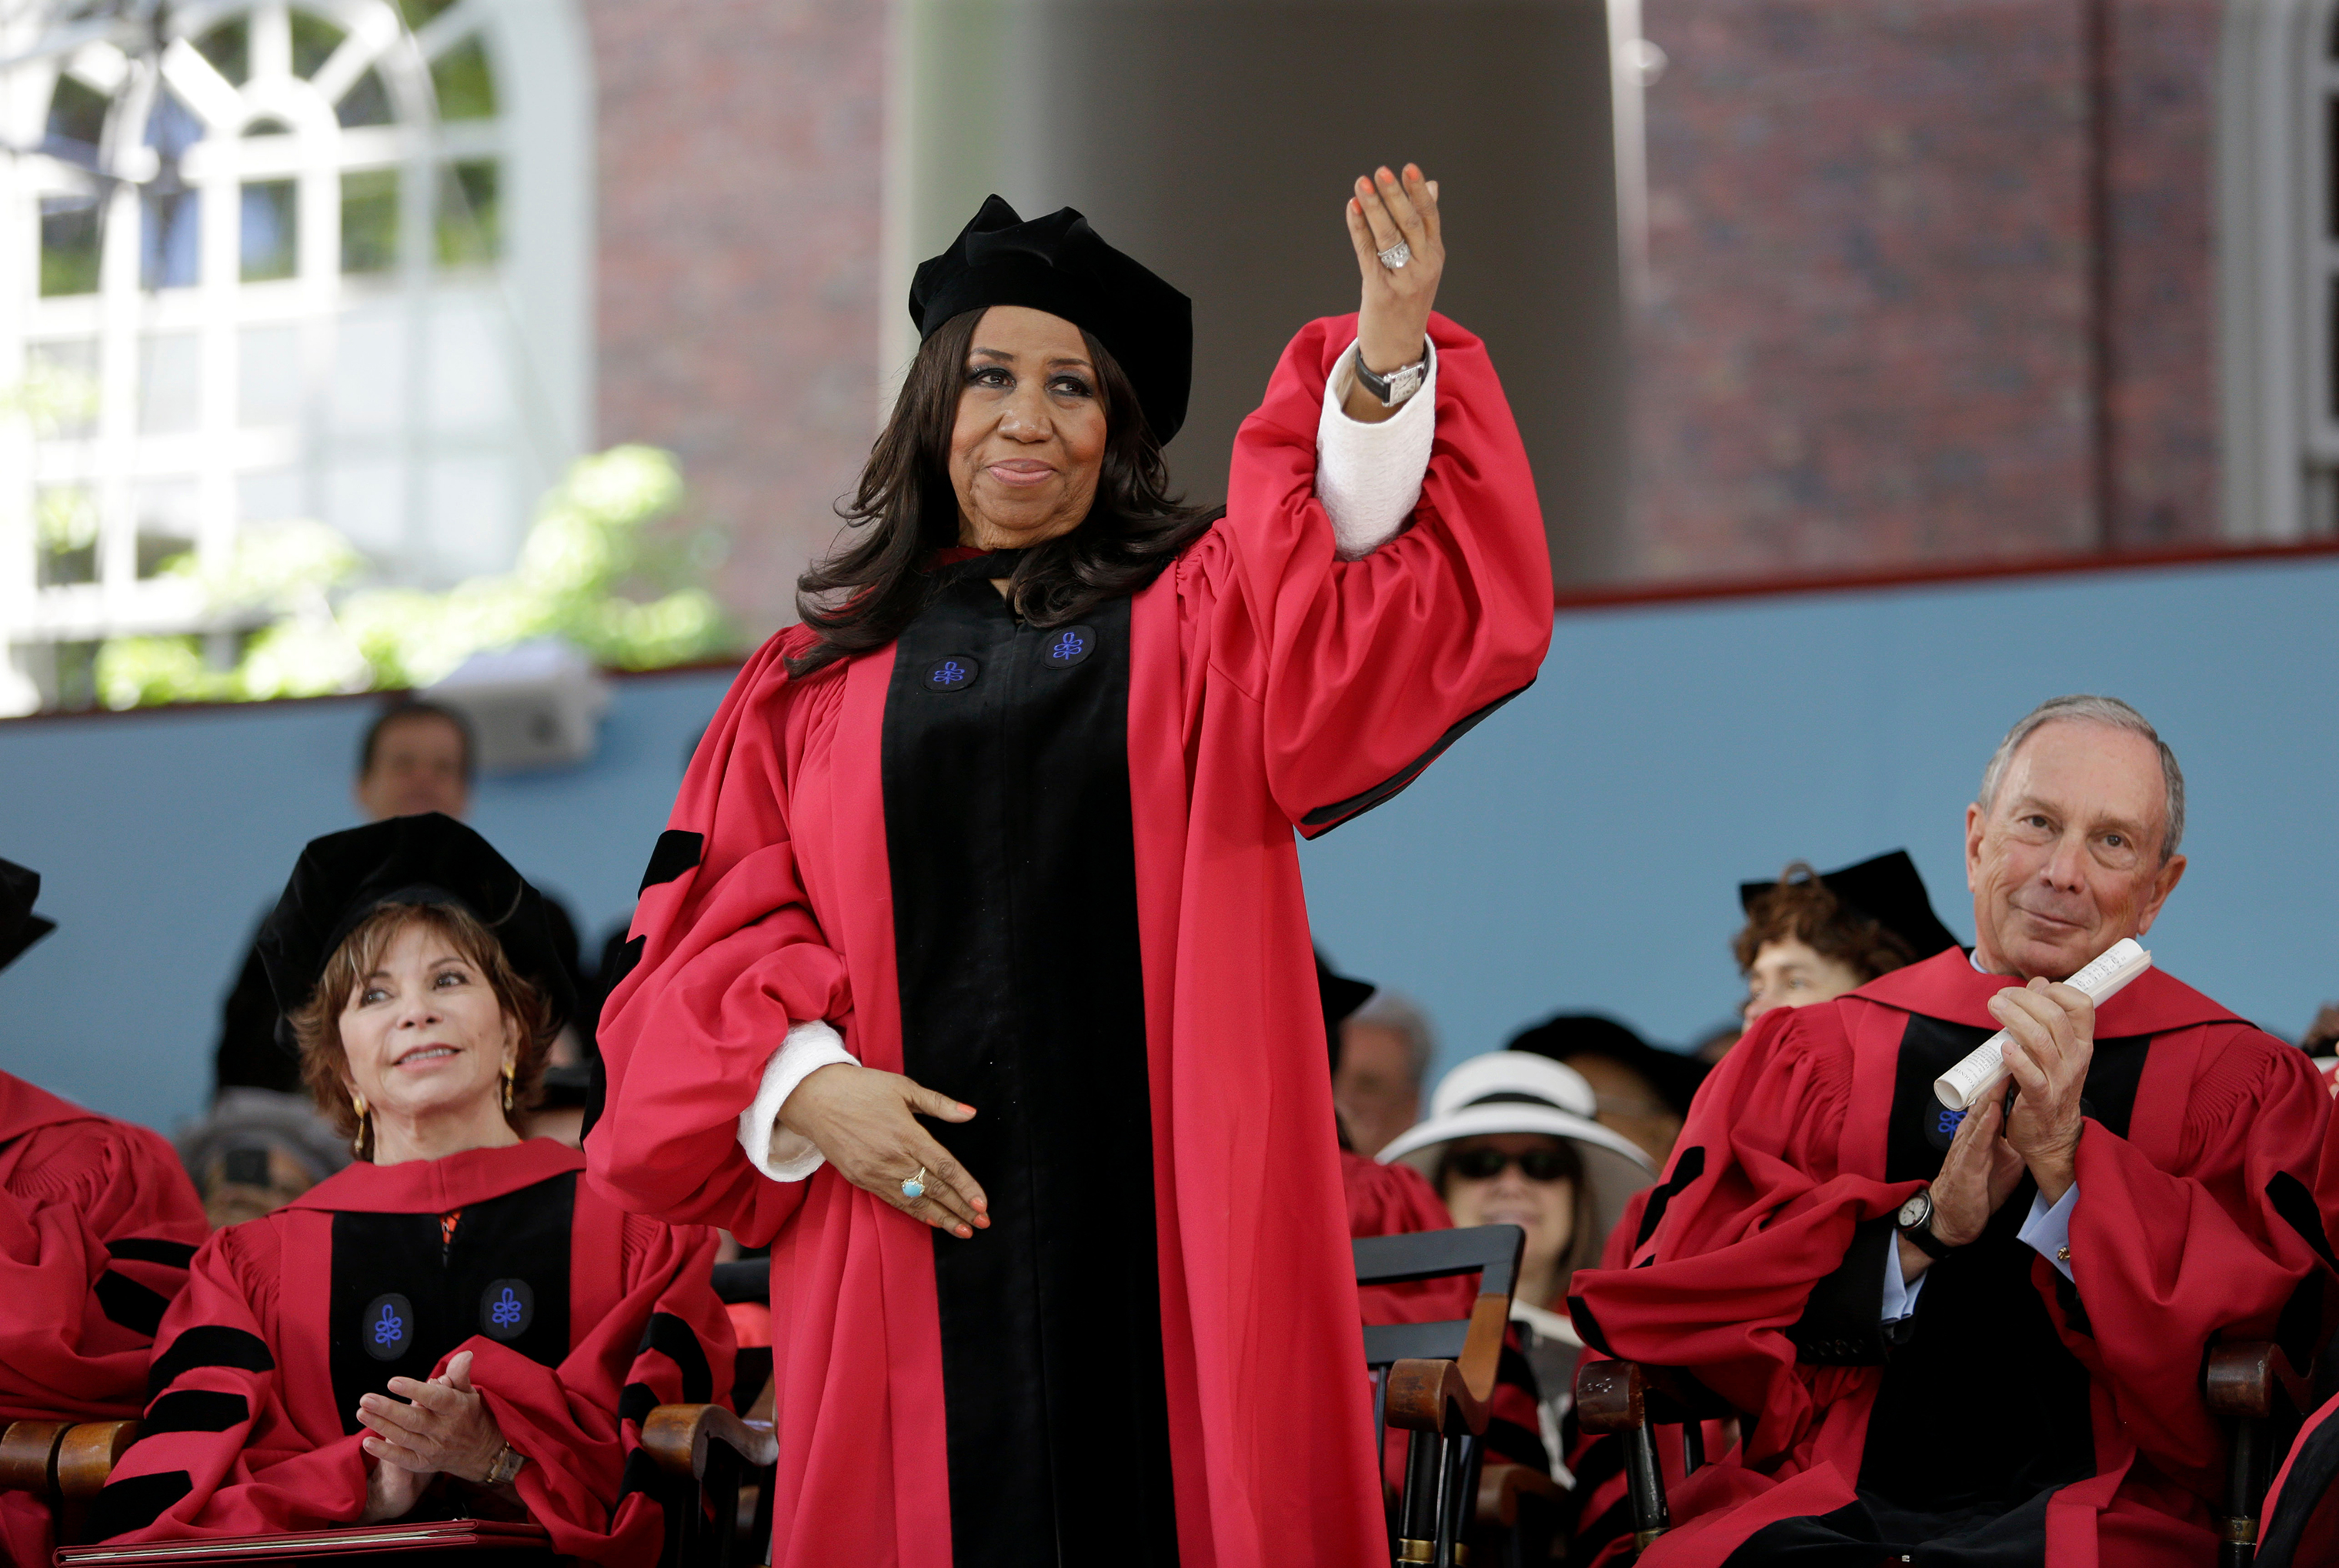 Aretha Franklin receives an honorary Doctor of Arts degree at the Harvard commencement ceremonies, in Cambridge, Mass. in May 2014. (Steven Senne—AP/Shutterstock)